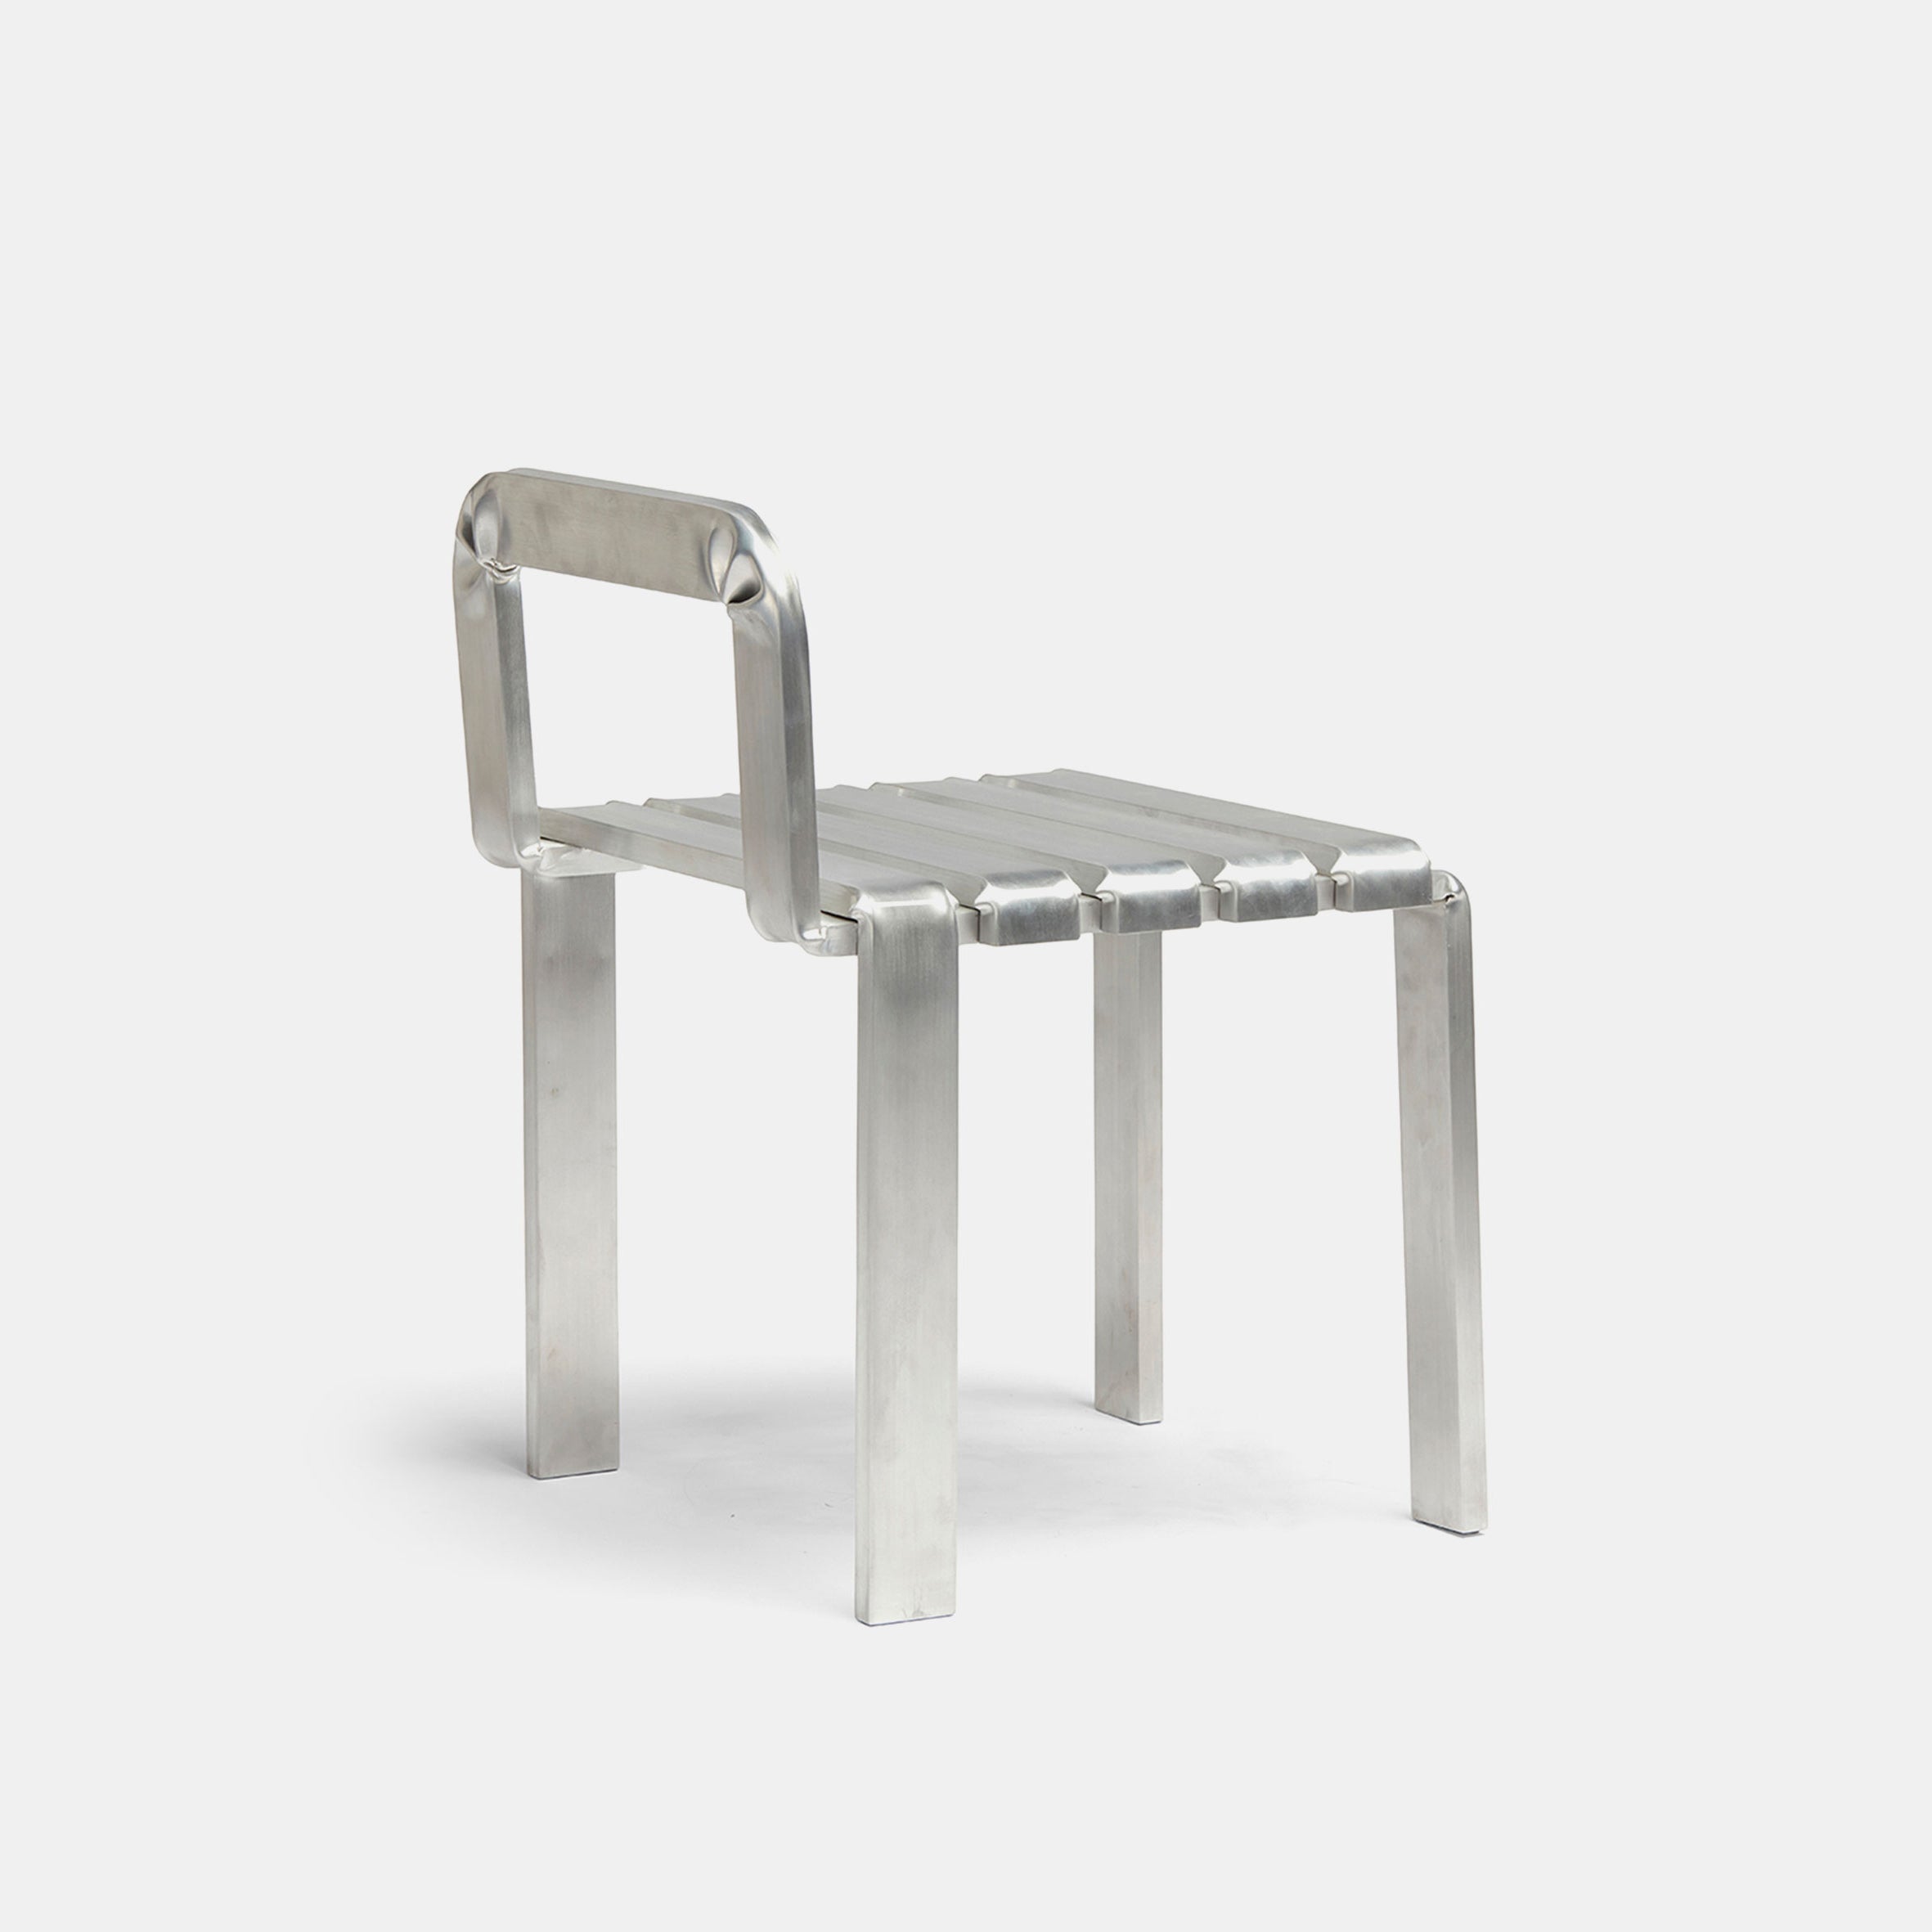 Unstressed Chair